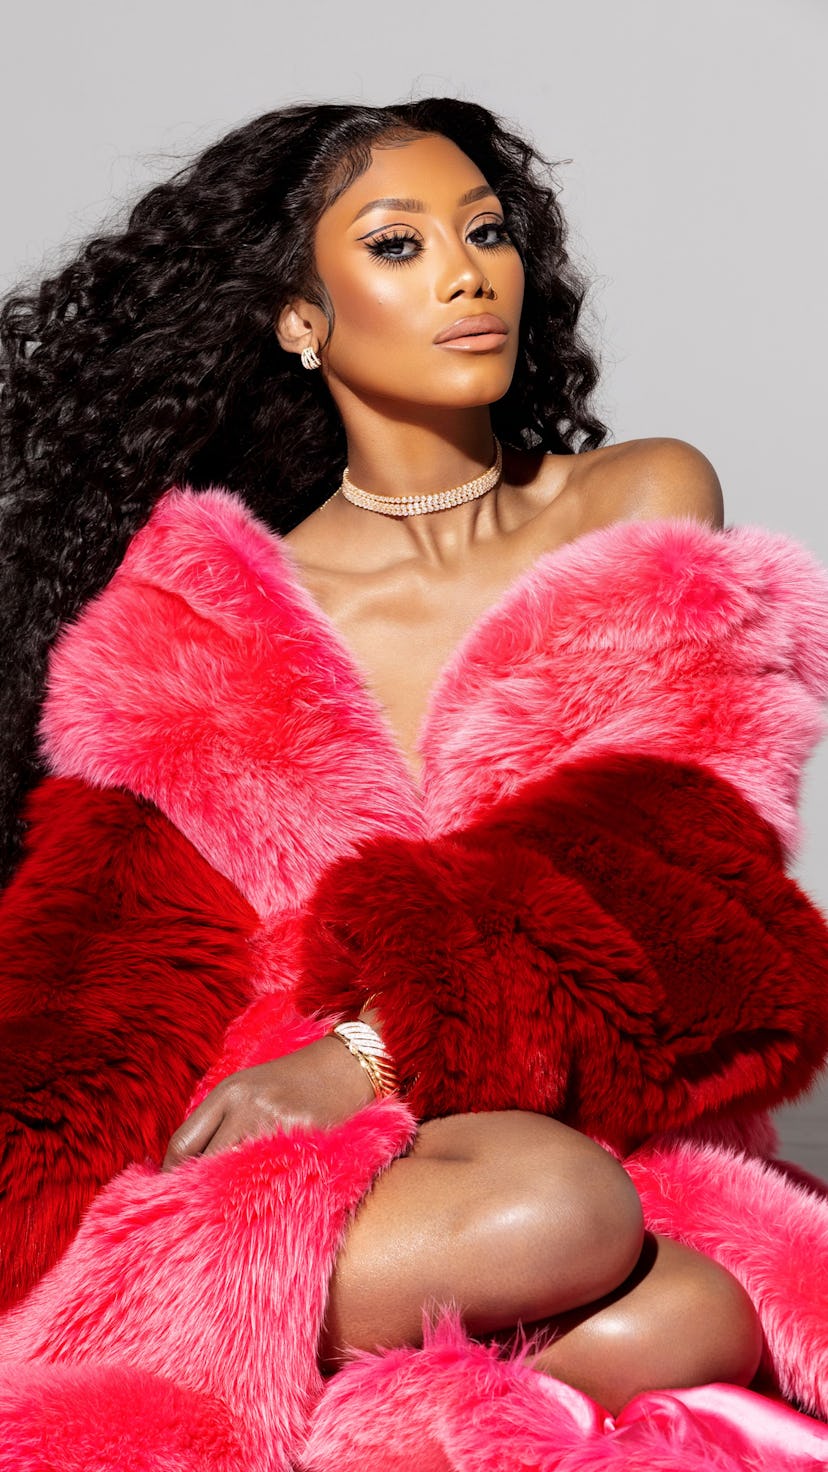 A model wearing combination of pink and red fur 